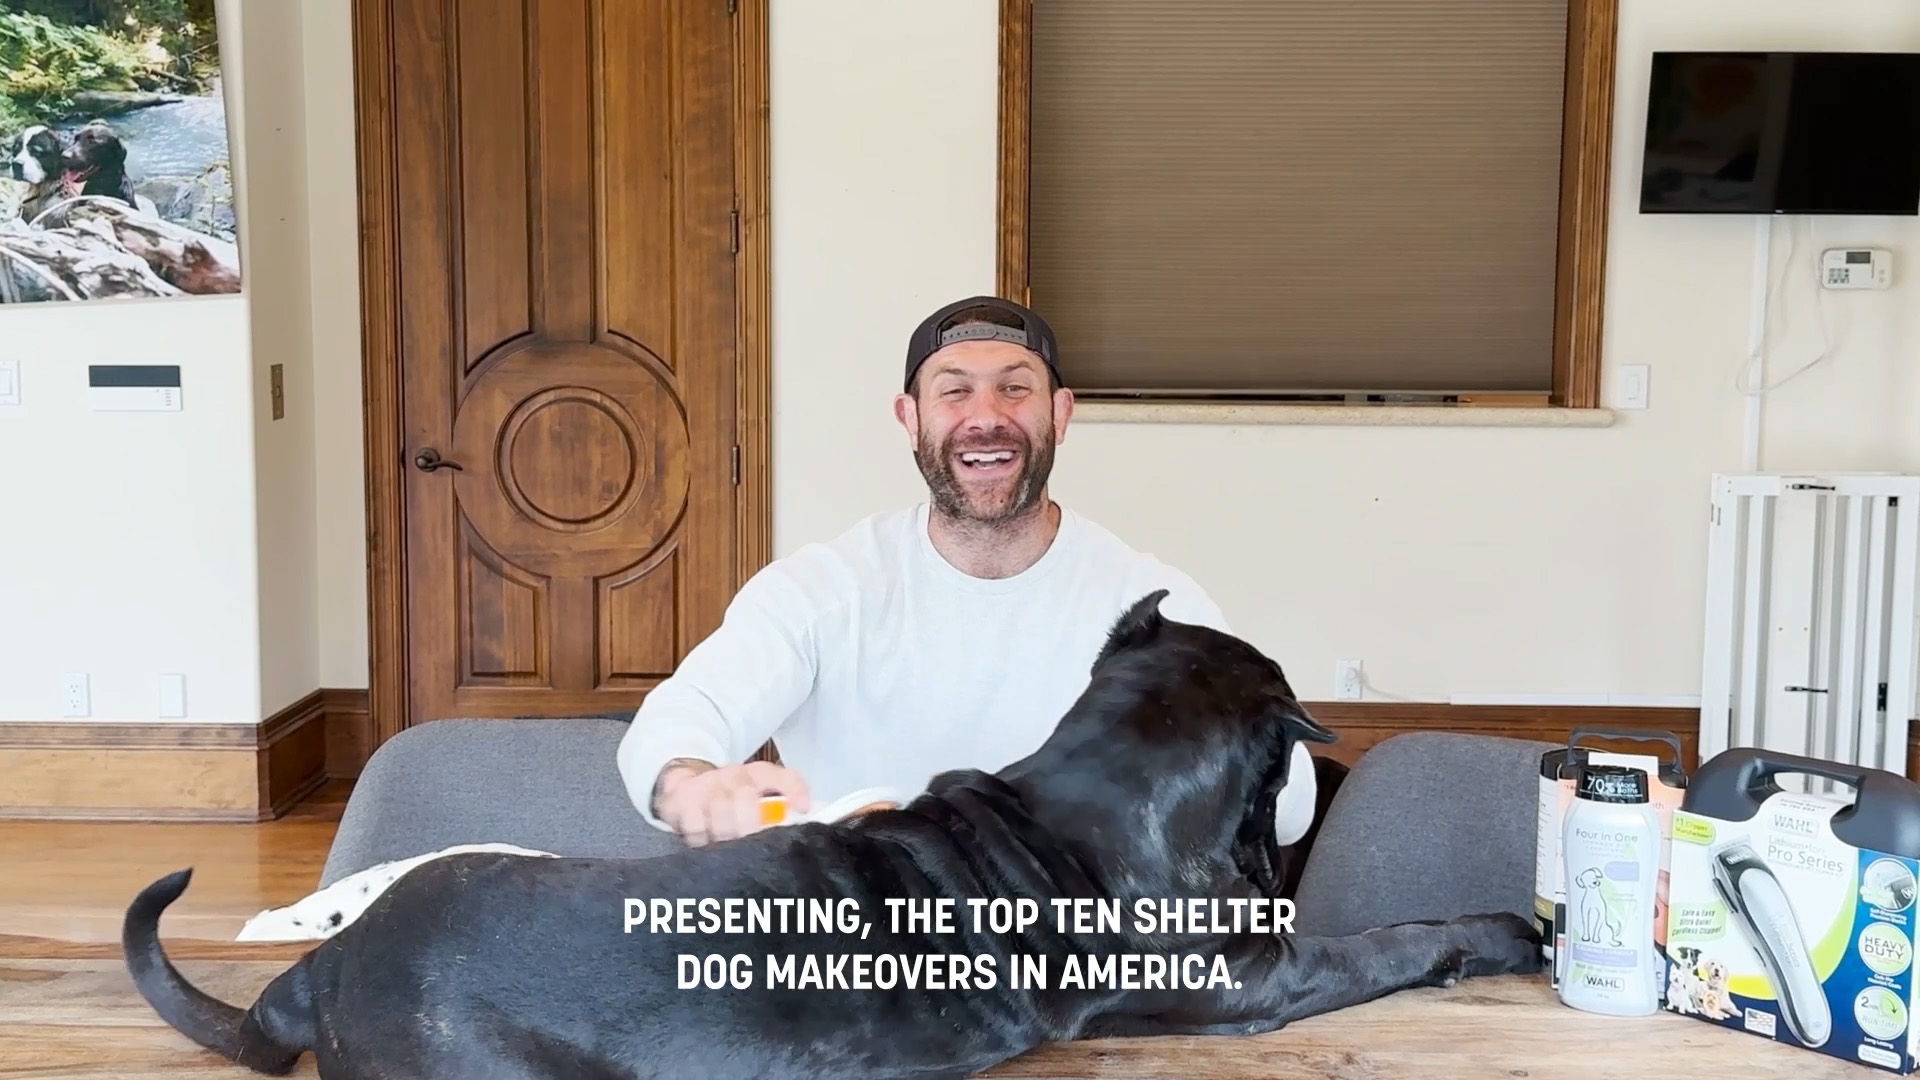 Animal advocate Lee Asher partners with Wahl to spread awareness about the importance of grooming when it comes to dog adoption. The 13th annual Dirty Dogs Contest awards grants to shelters.